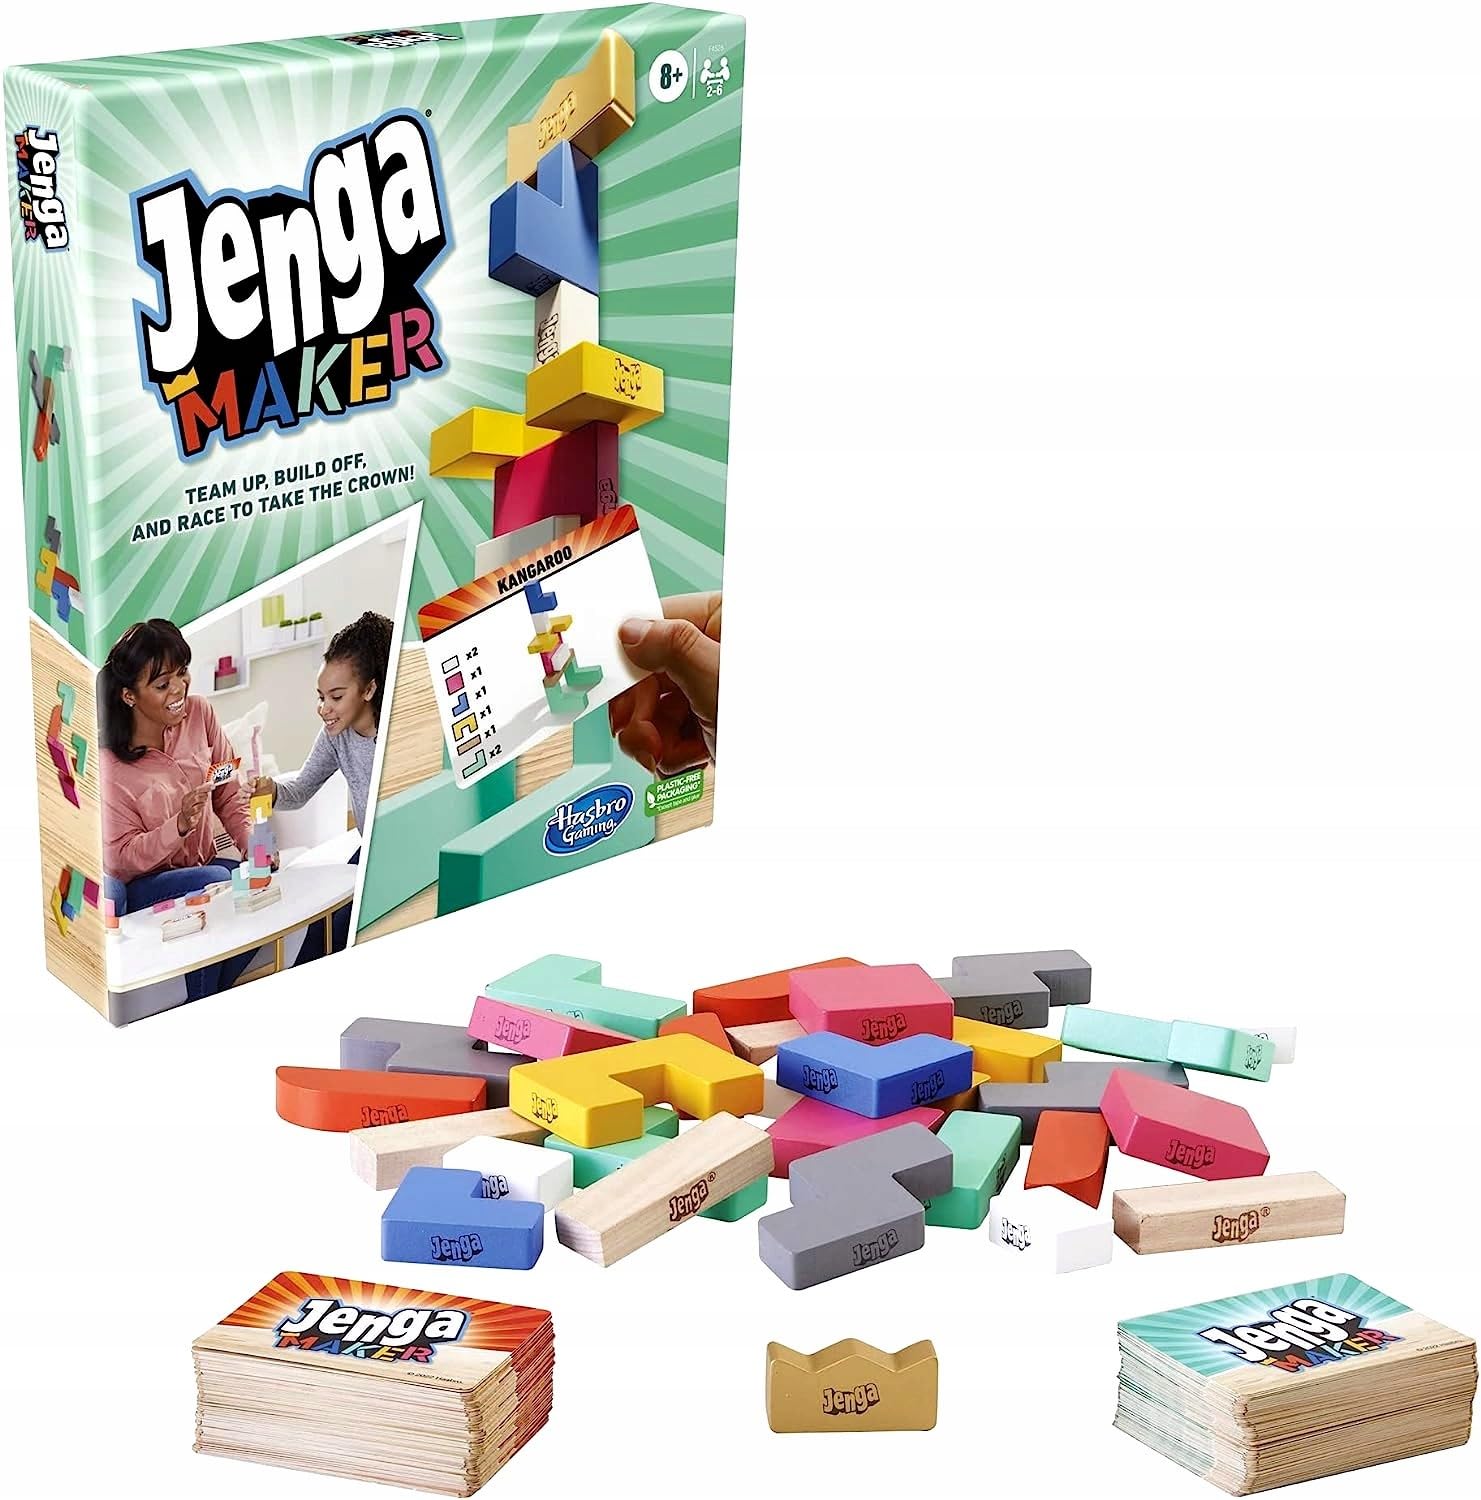 Monopoly Jenga Maker, Wooden Blocks, Stacking Tower Game, Game for Kids Ages 8 and Up, Game for 2-6 Players, Multicolor